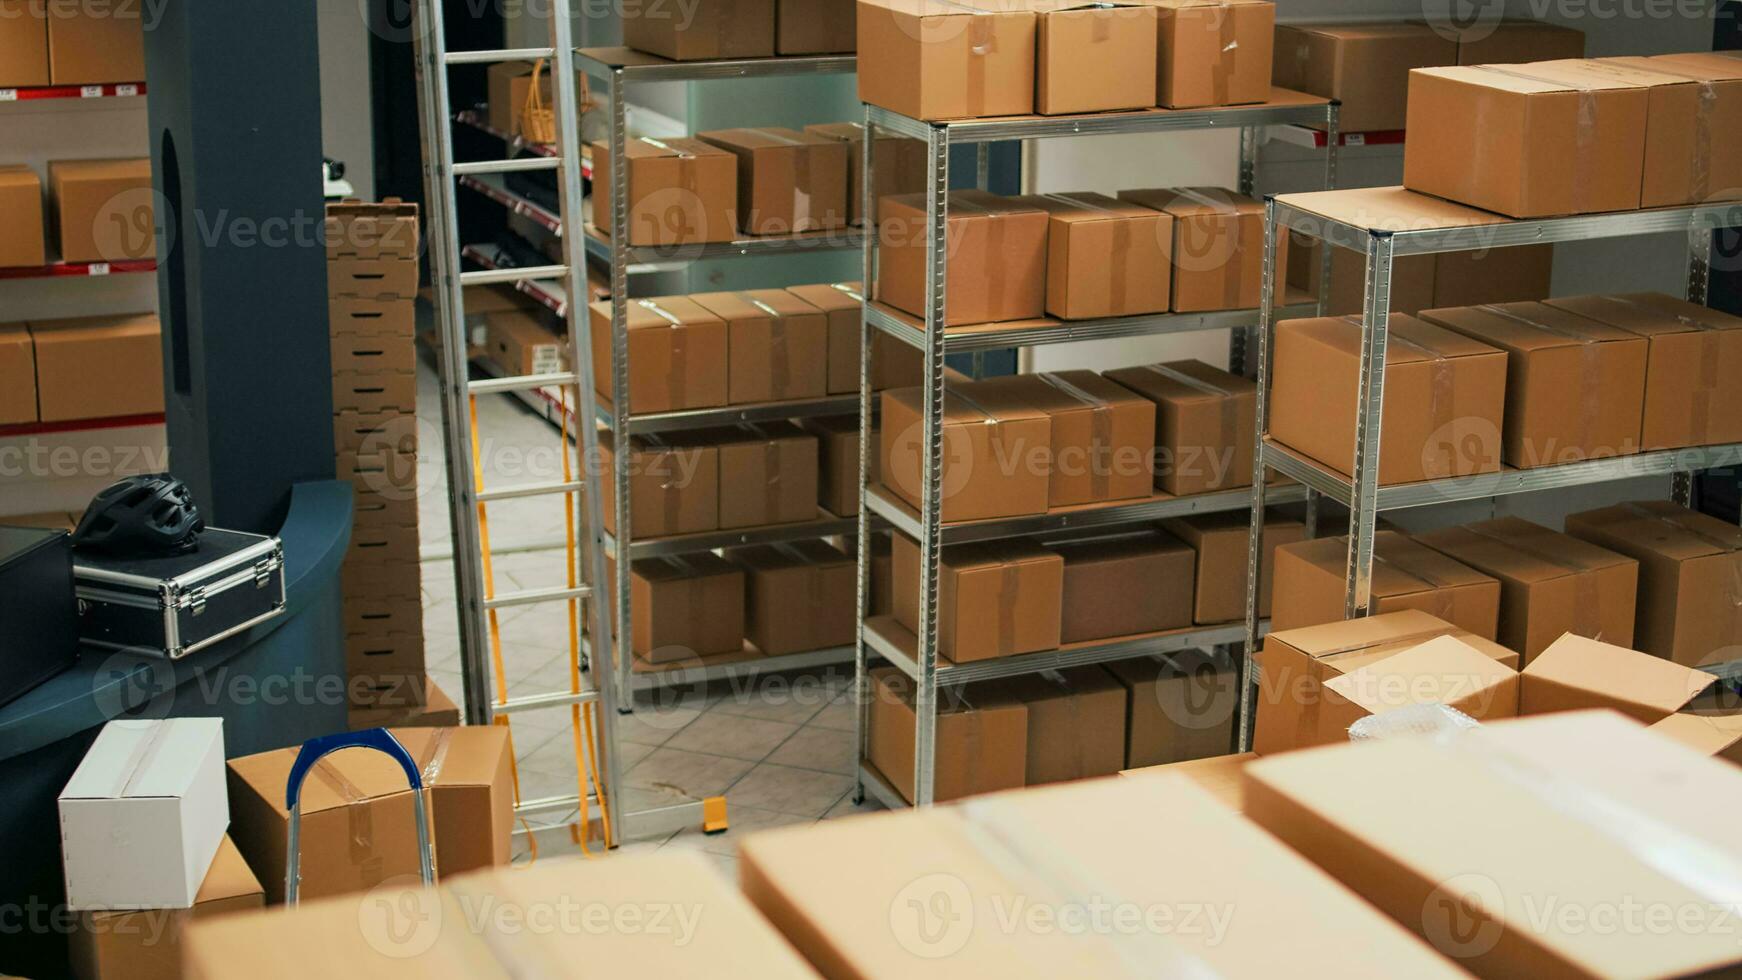 Warehouse filled with raw materials and racks to put cardboard boxes, preparing packages with merchandise and products for shipping. Empty storage room used for quality control, small business. photo